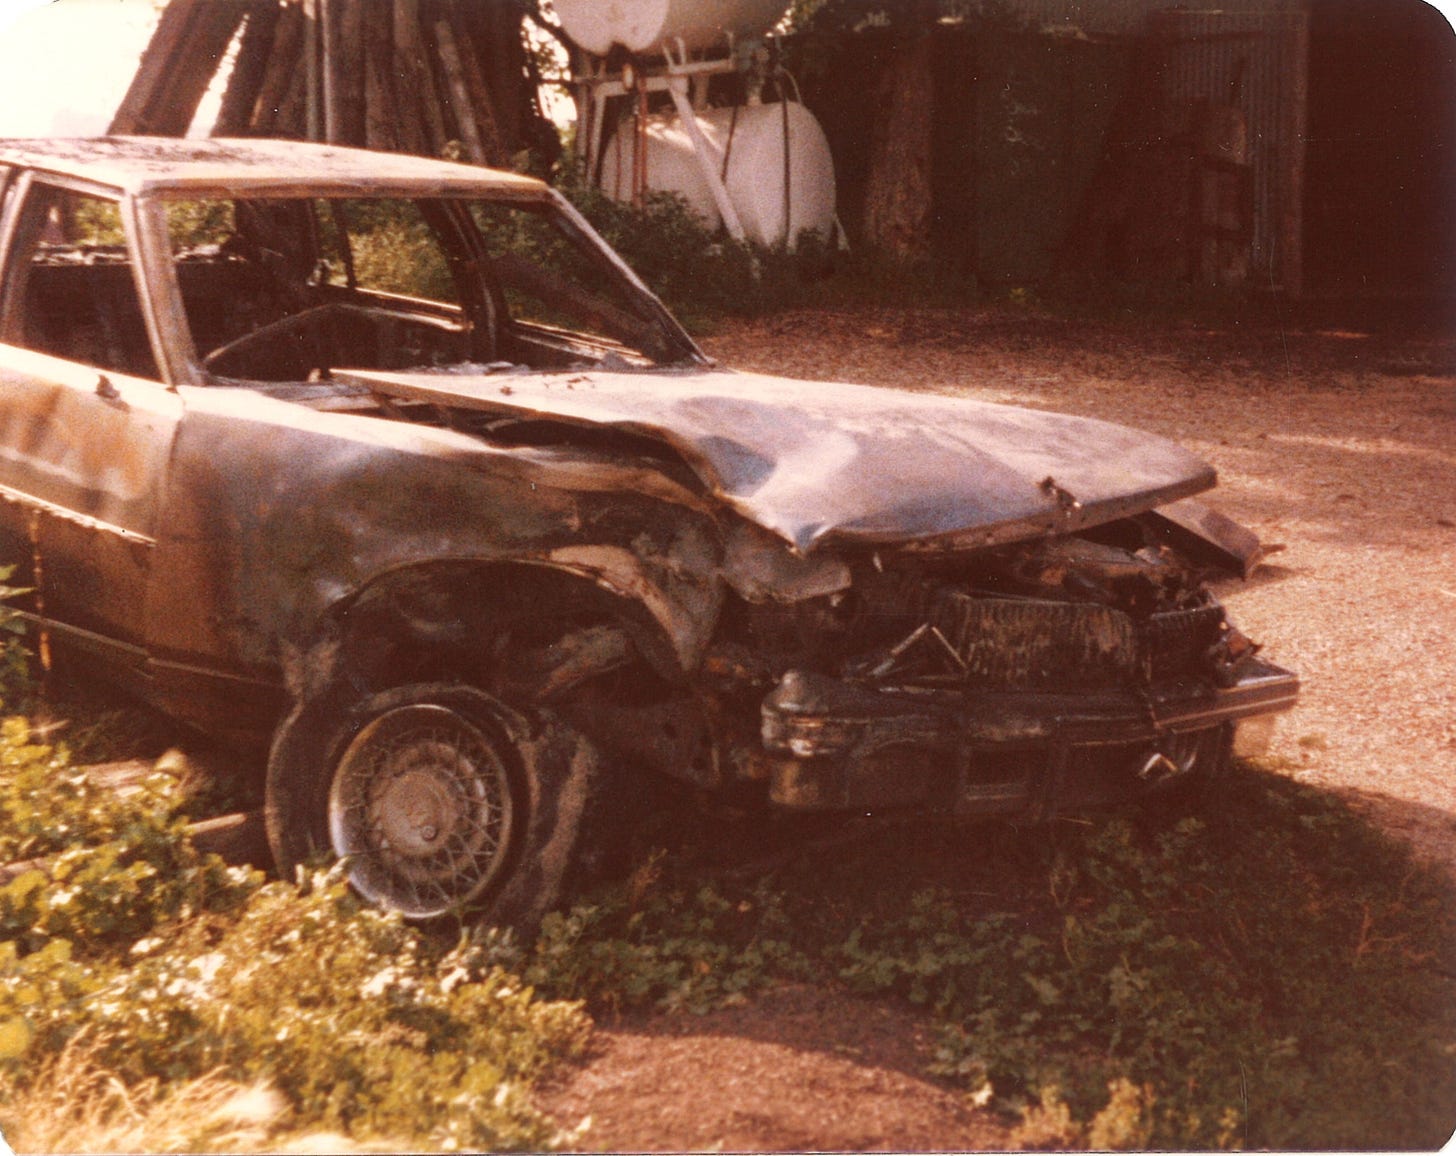 Burned Cadillac Seville front right July1979